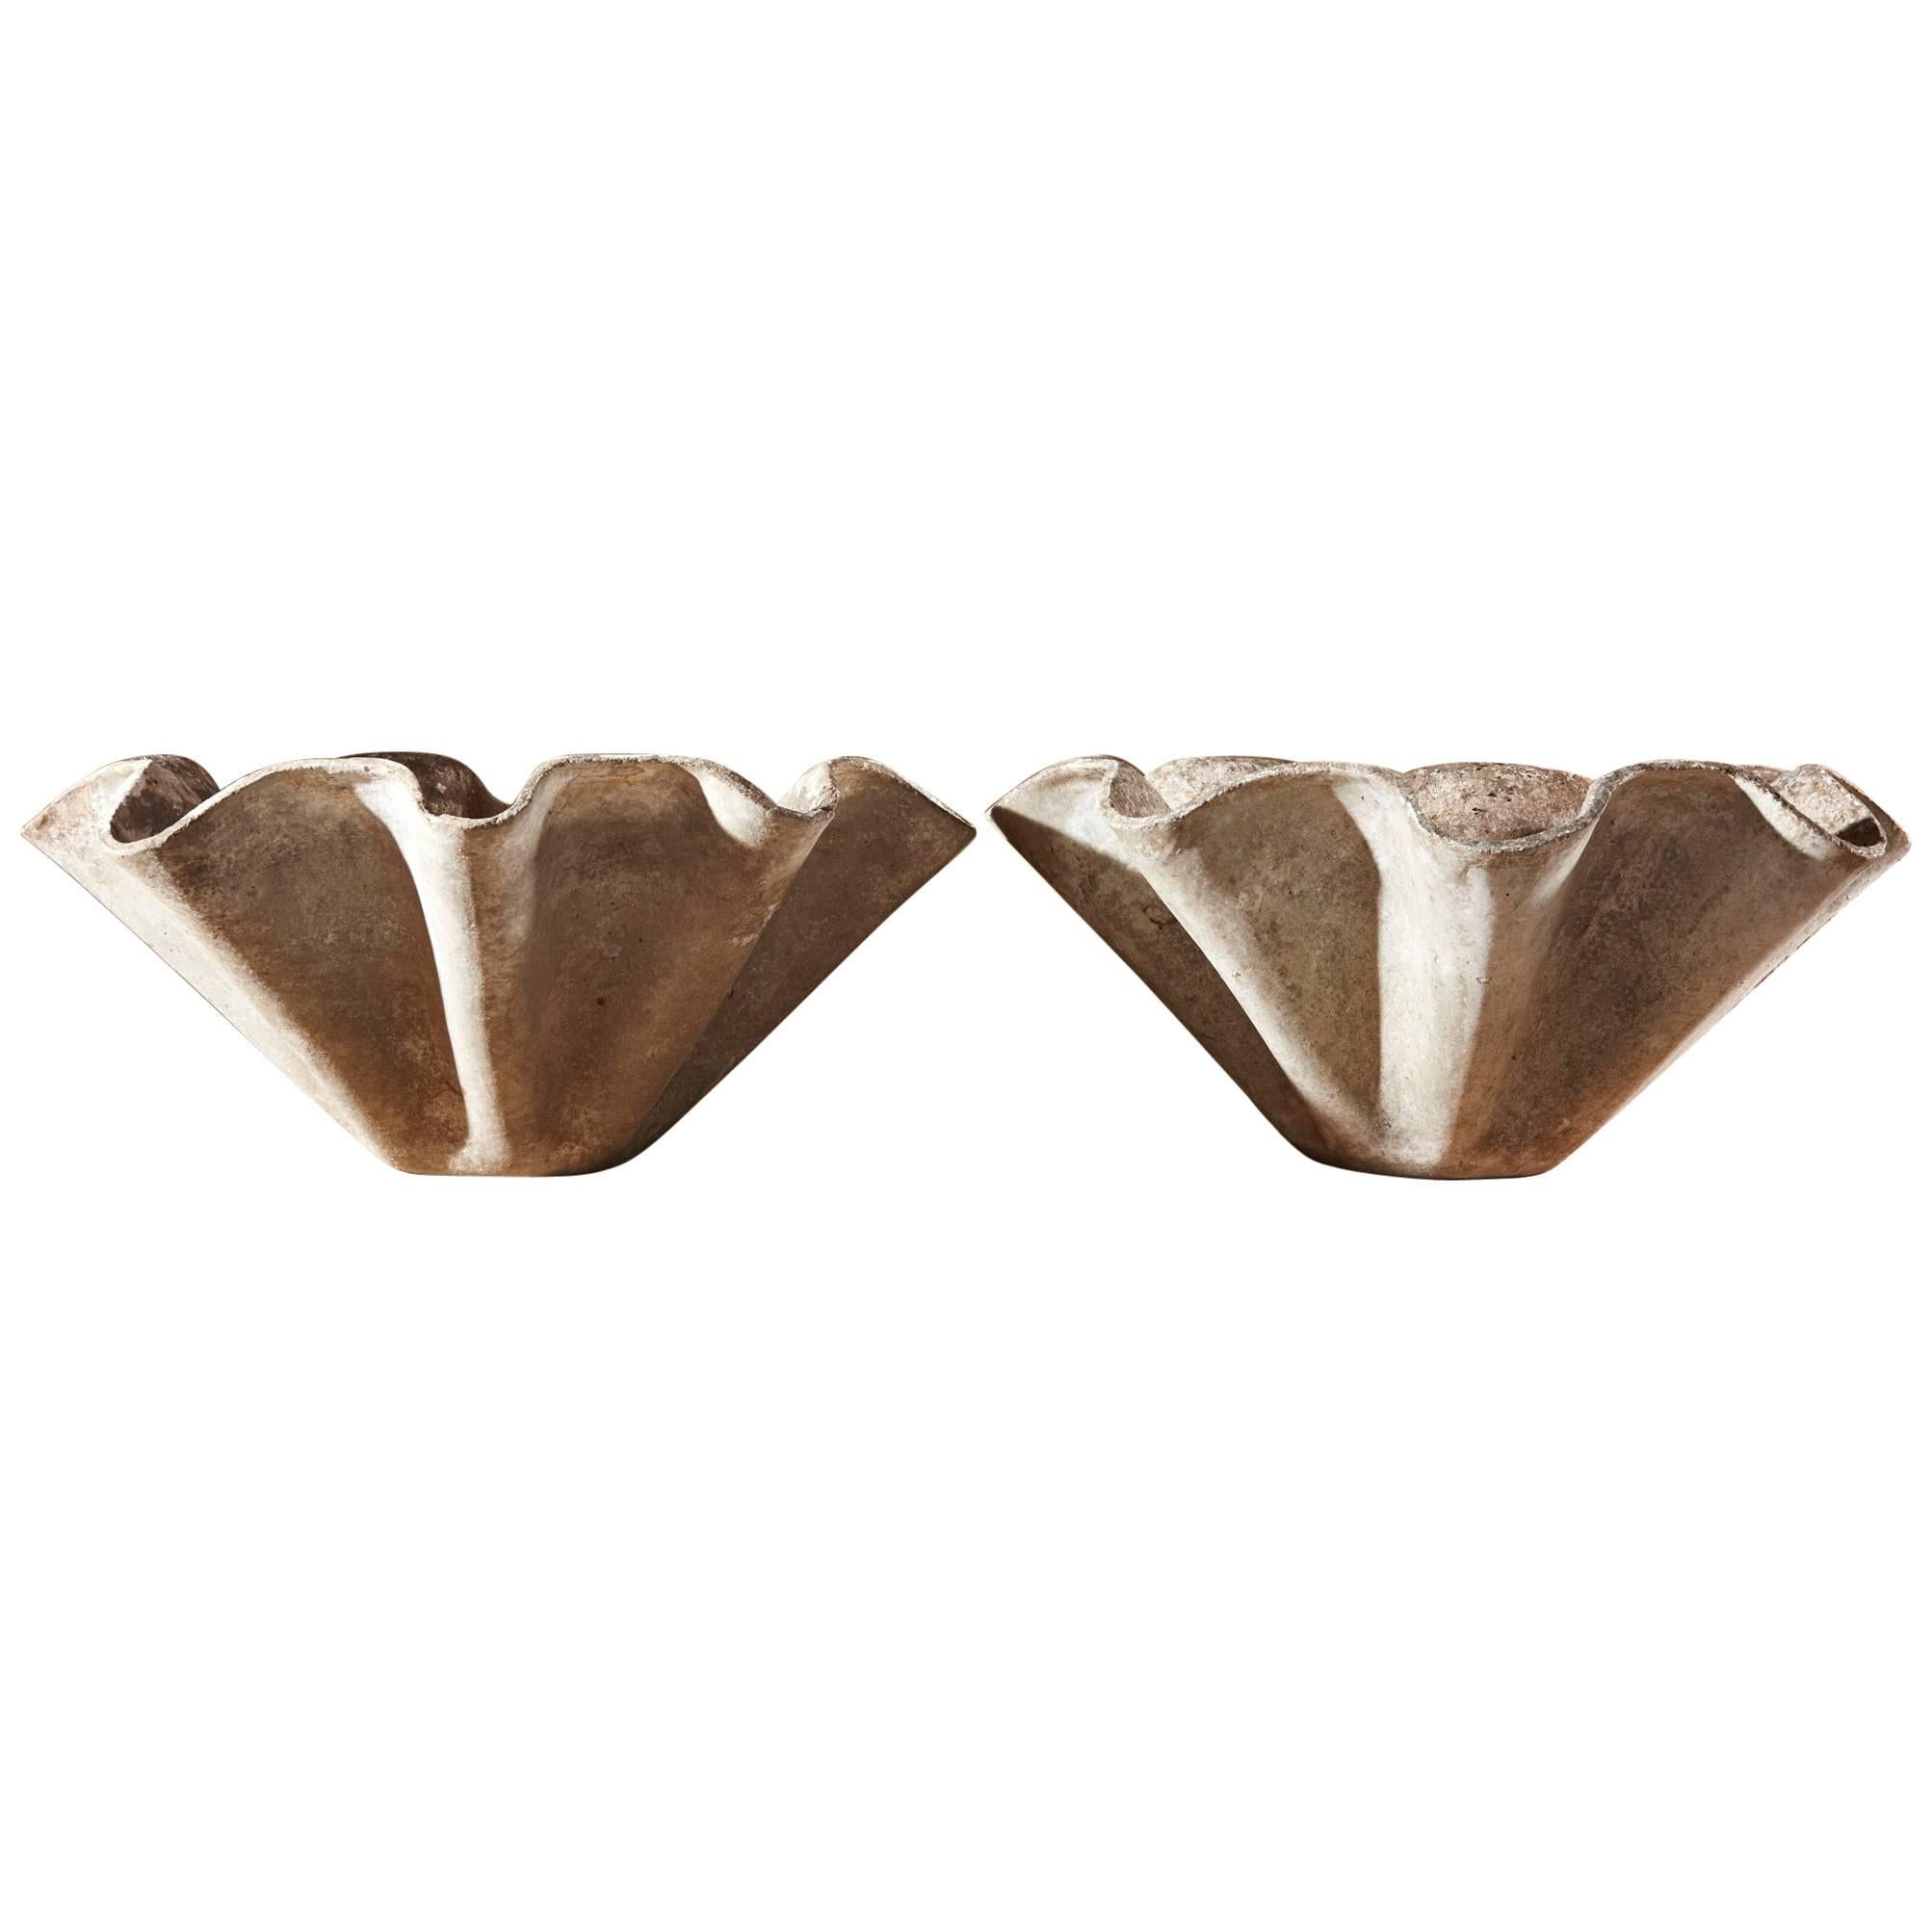 Pair of Willy Handkerchief Planters